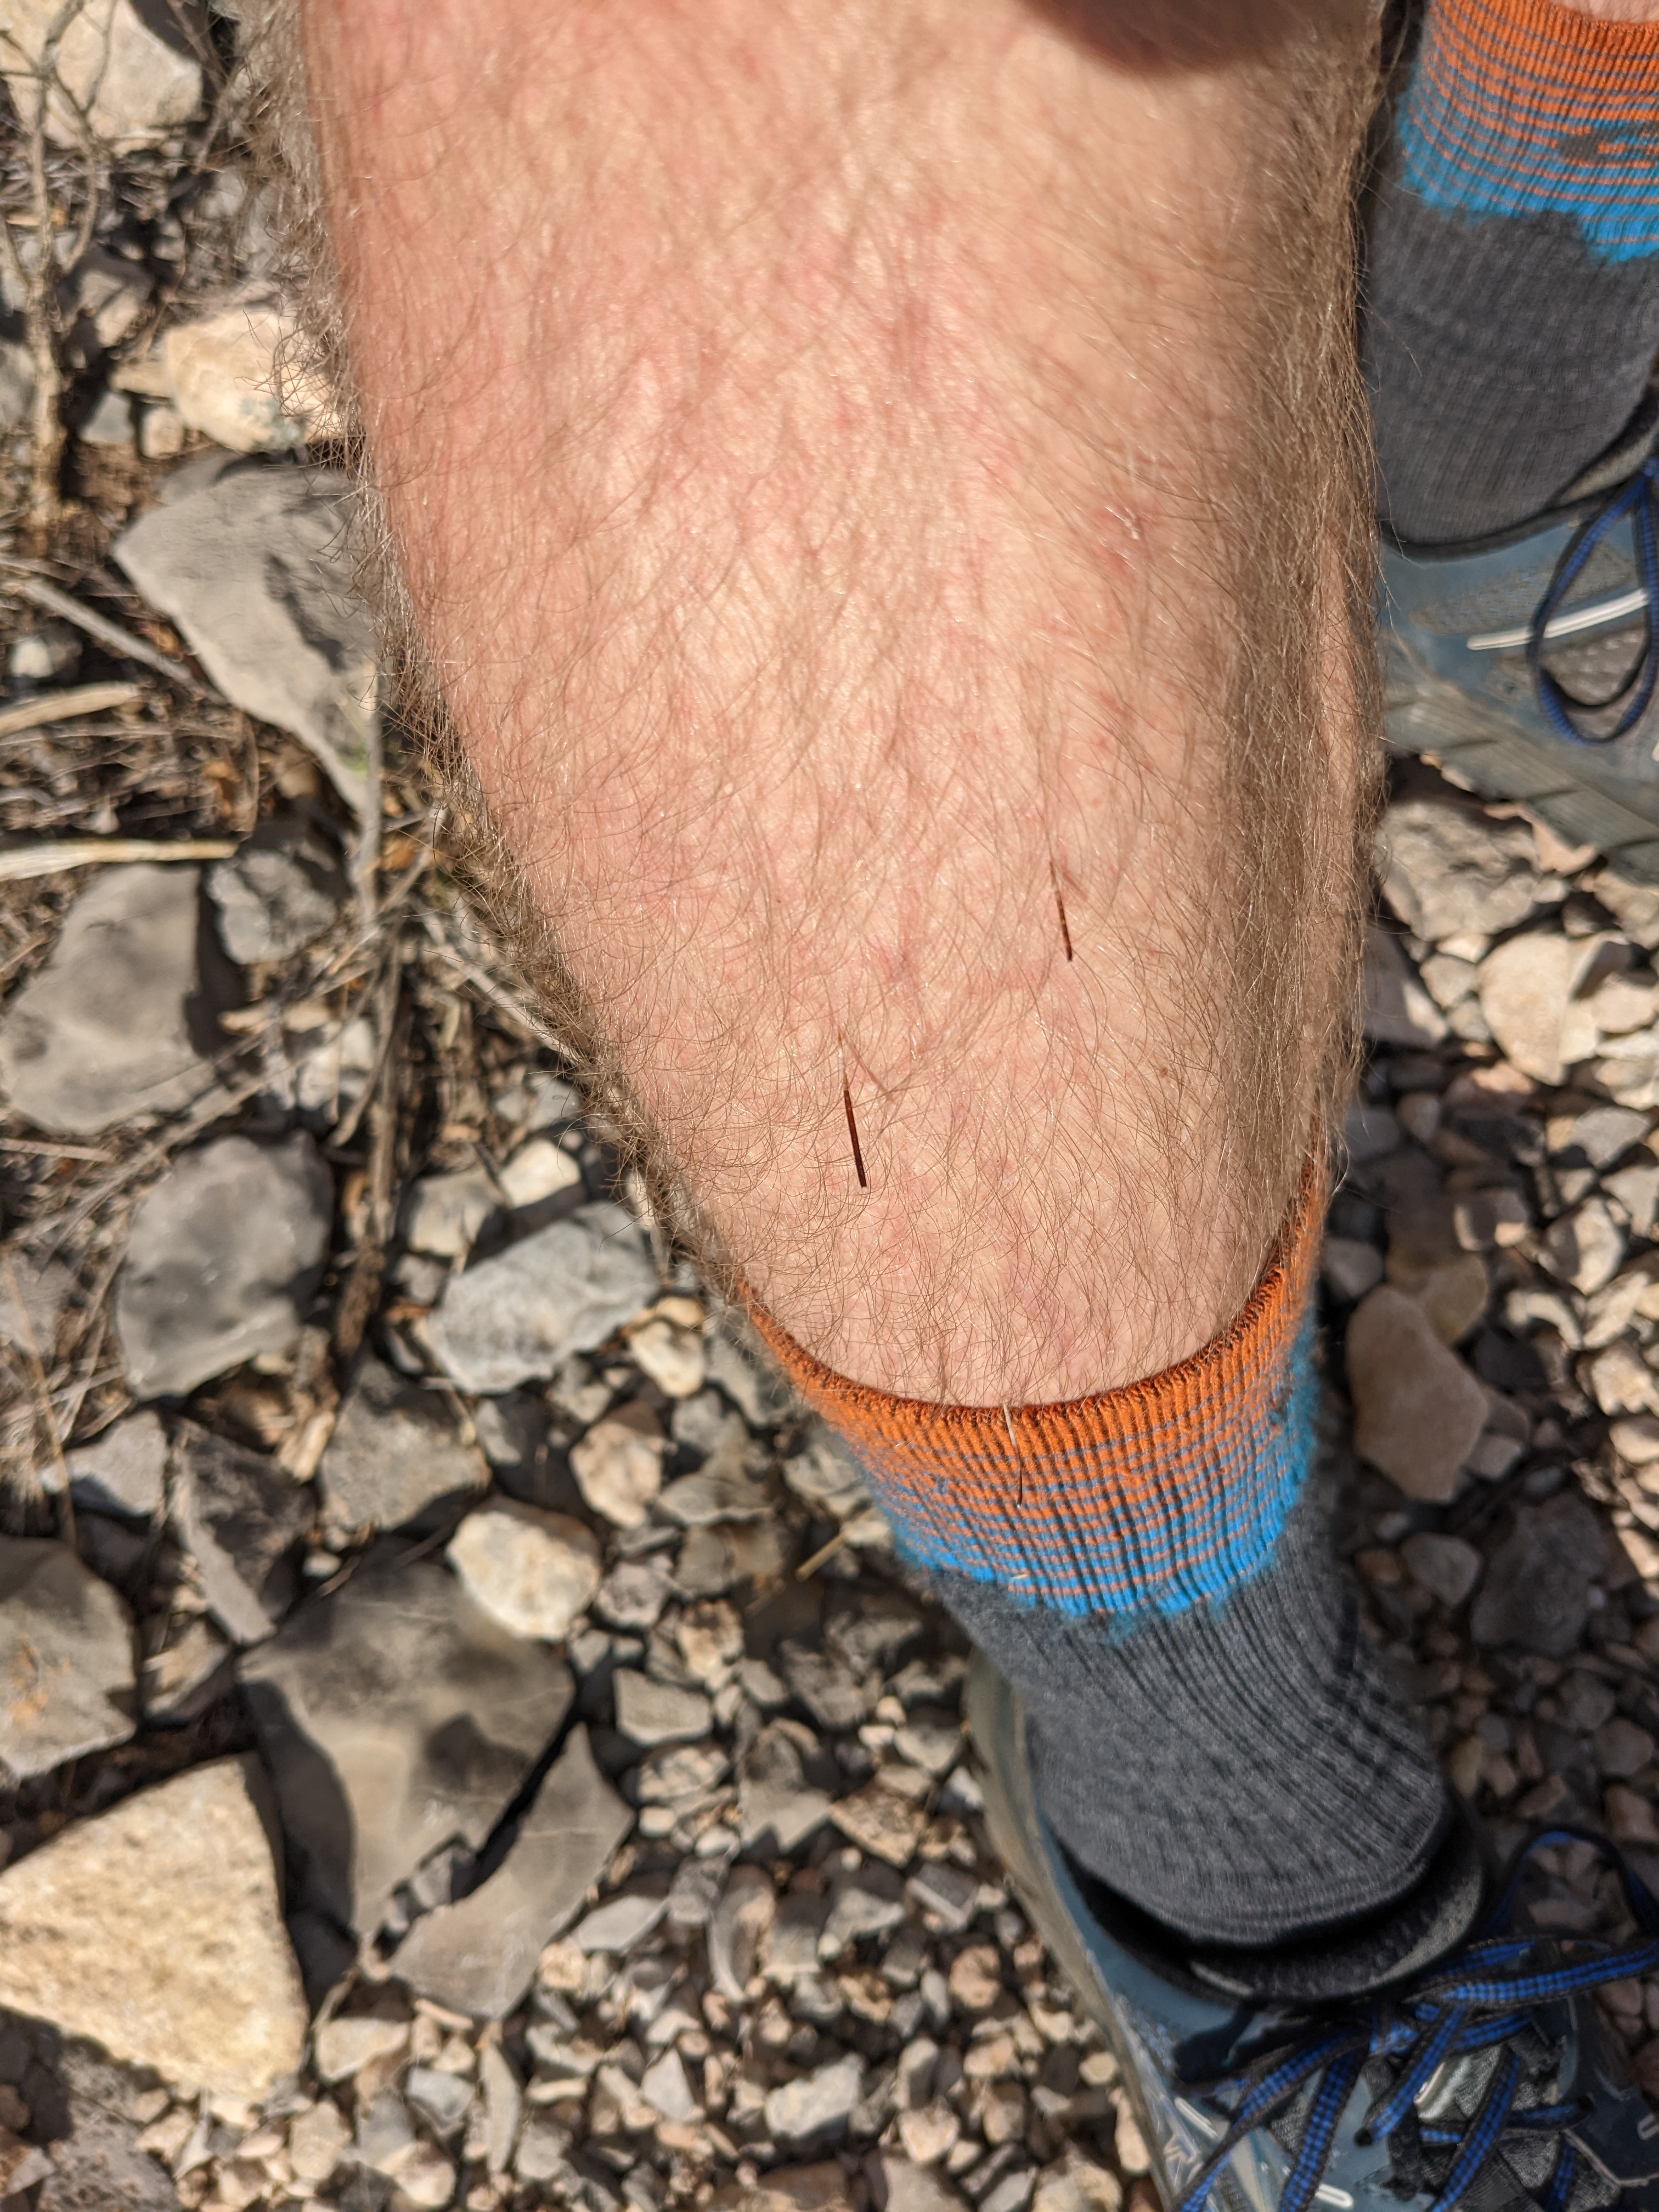 Thorns from cactus in Kyle's leg